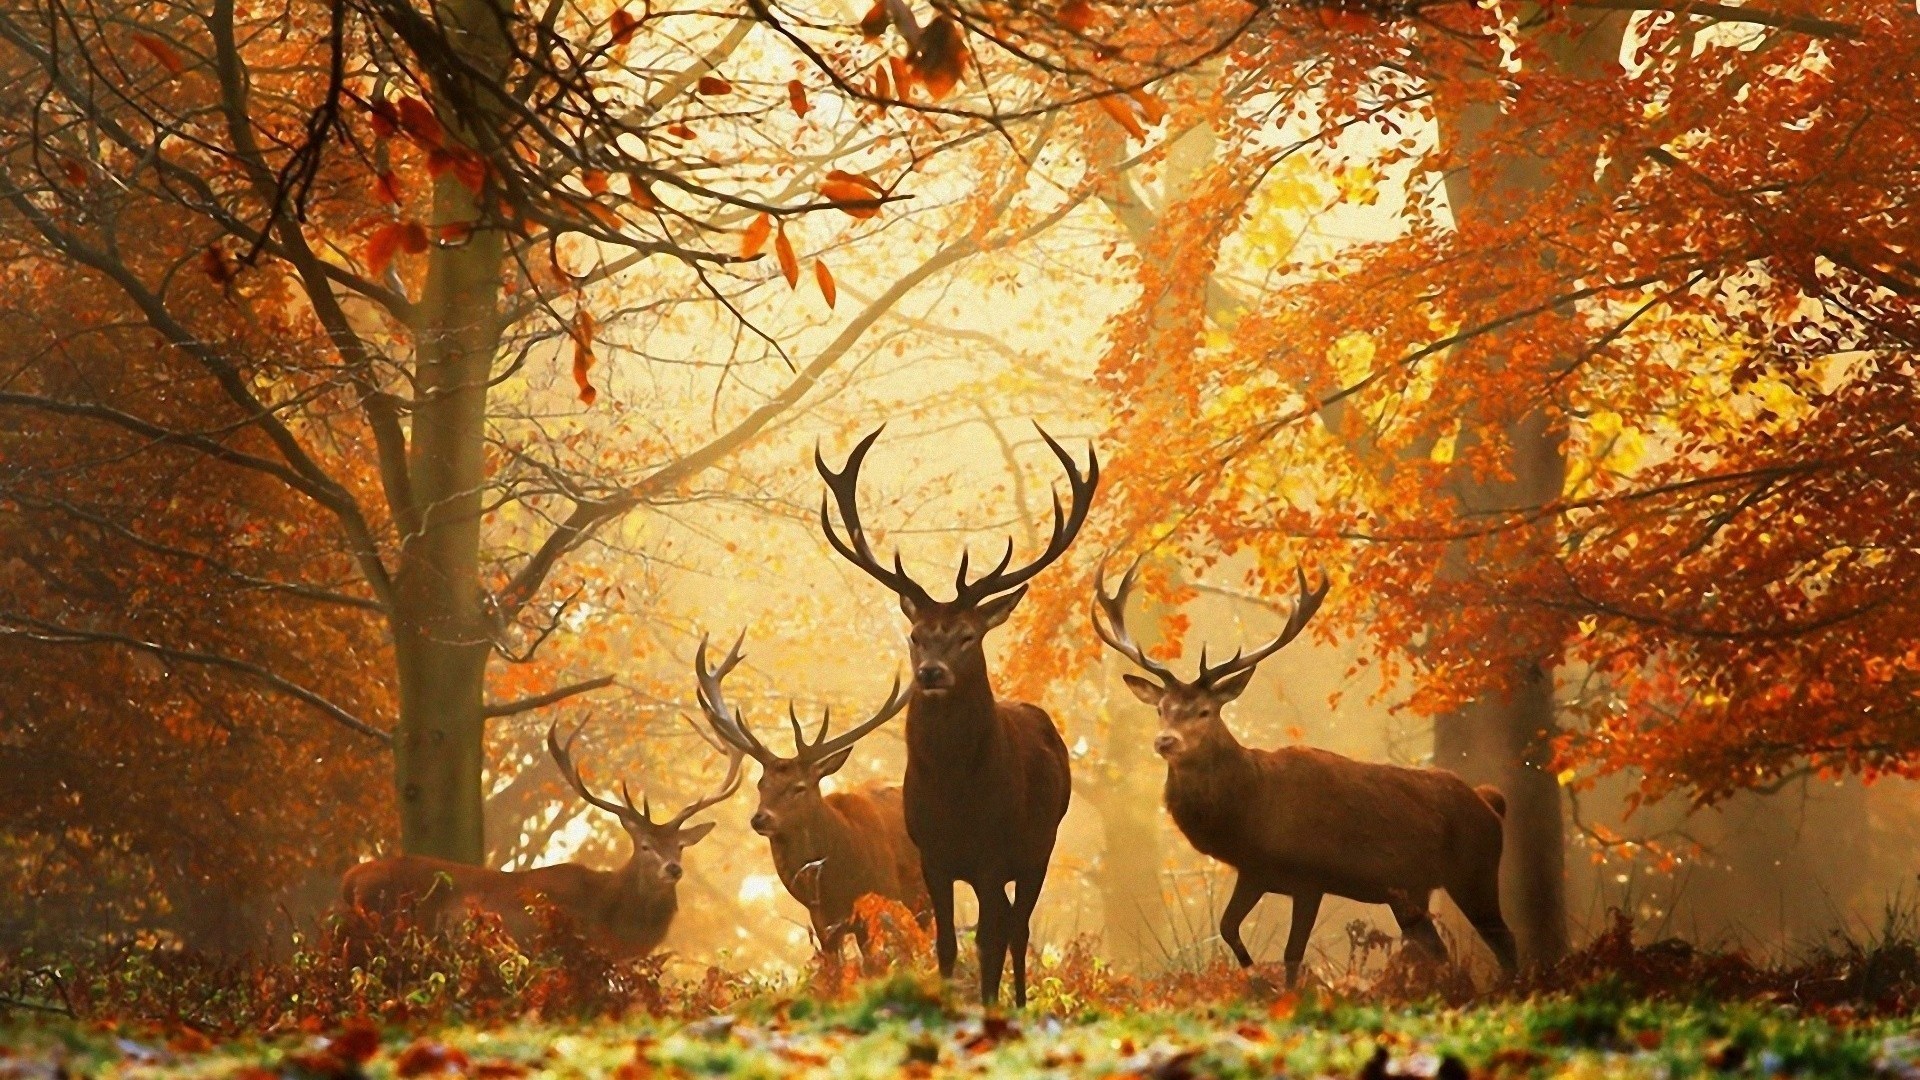 Trees, Foliage, Autumn, Horns, Leaves, Nature, Deer, - Beautiful Deer In Forest - HD Wallpaper 